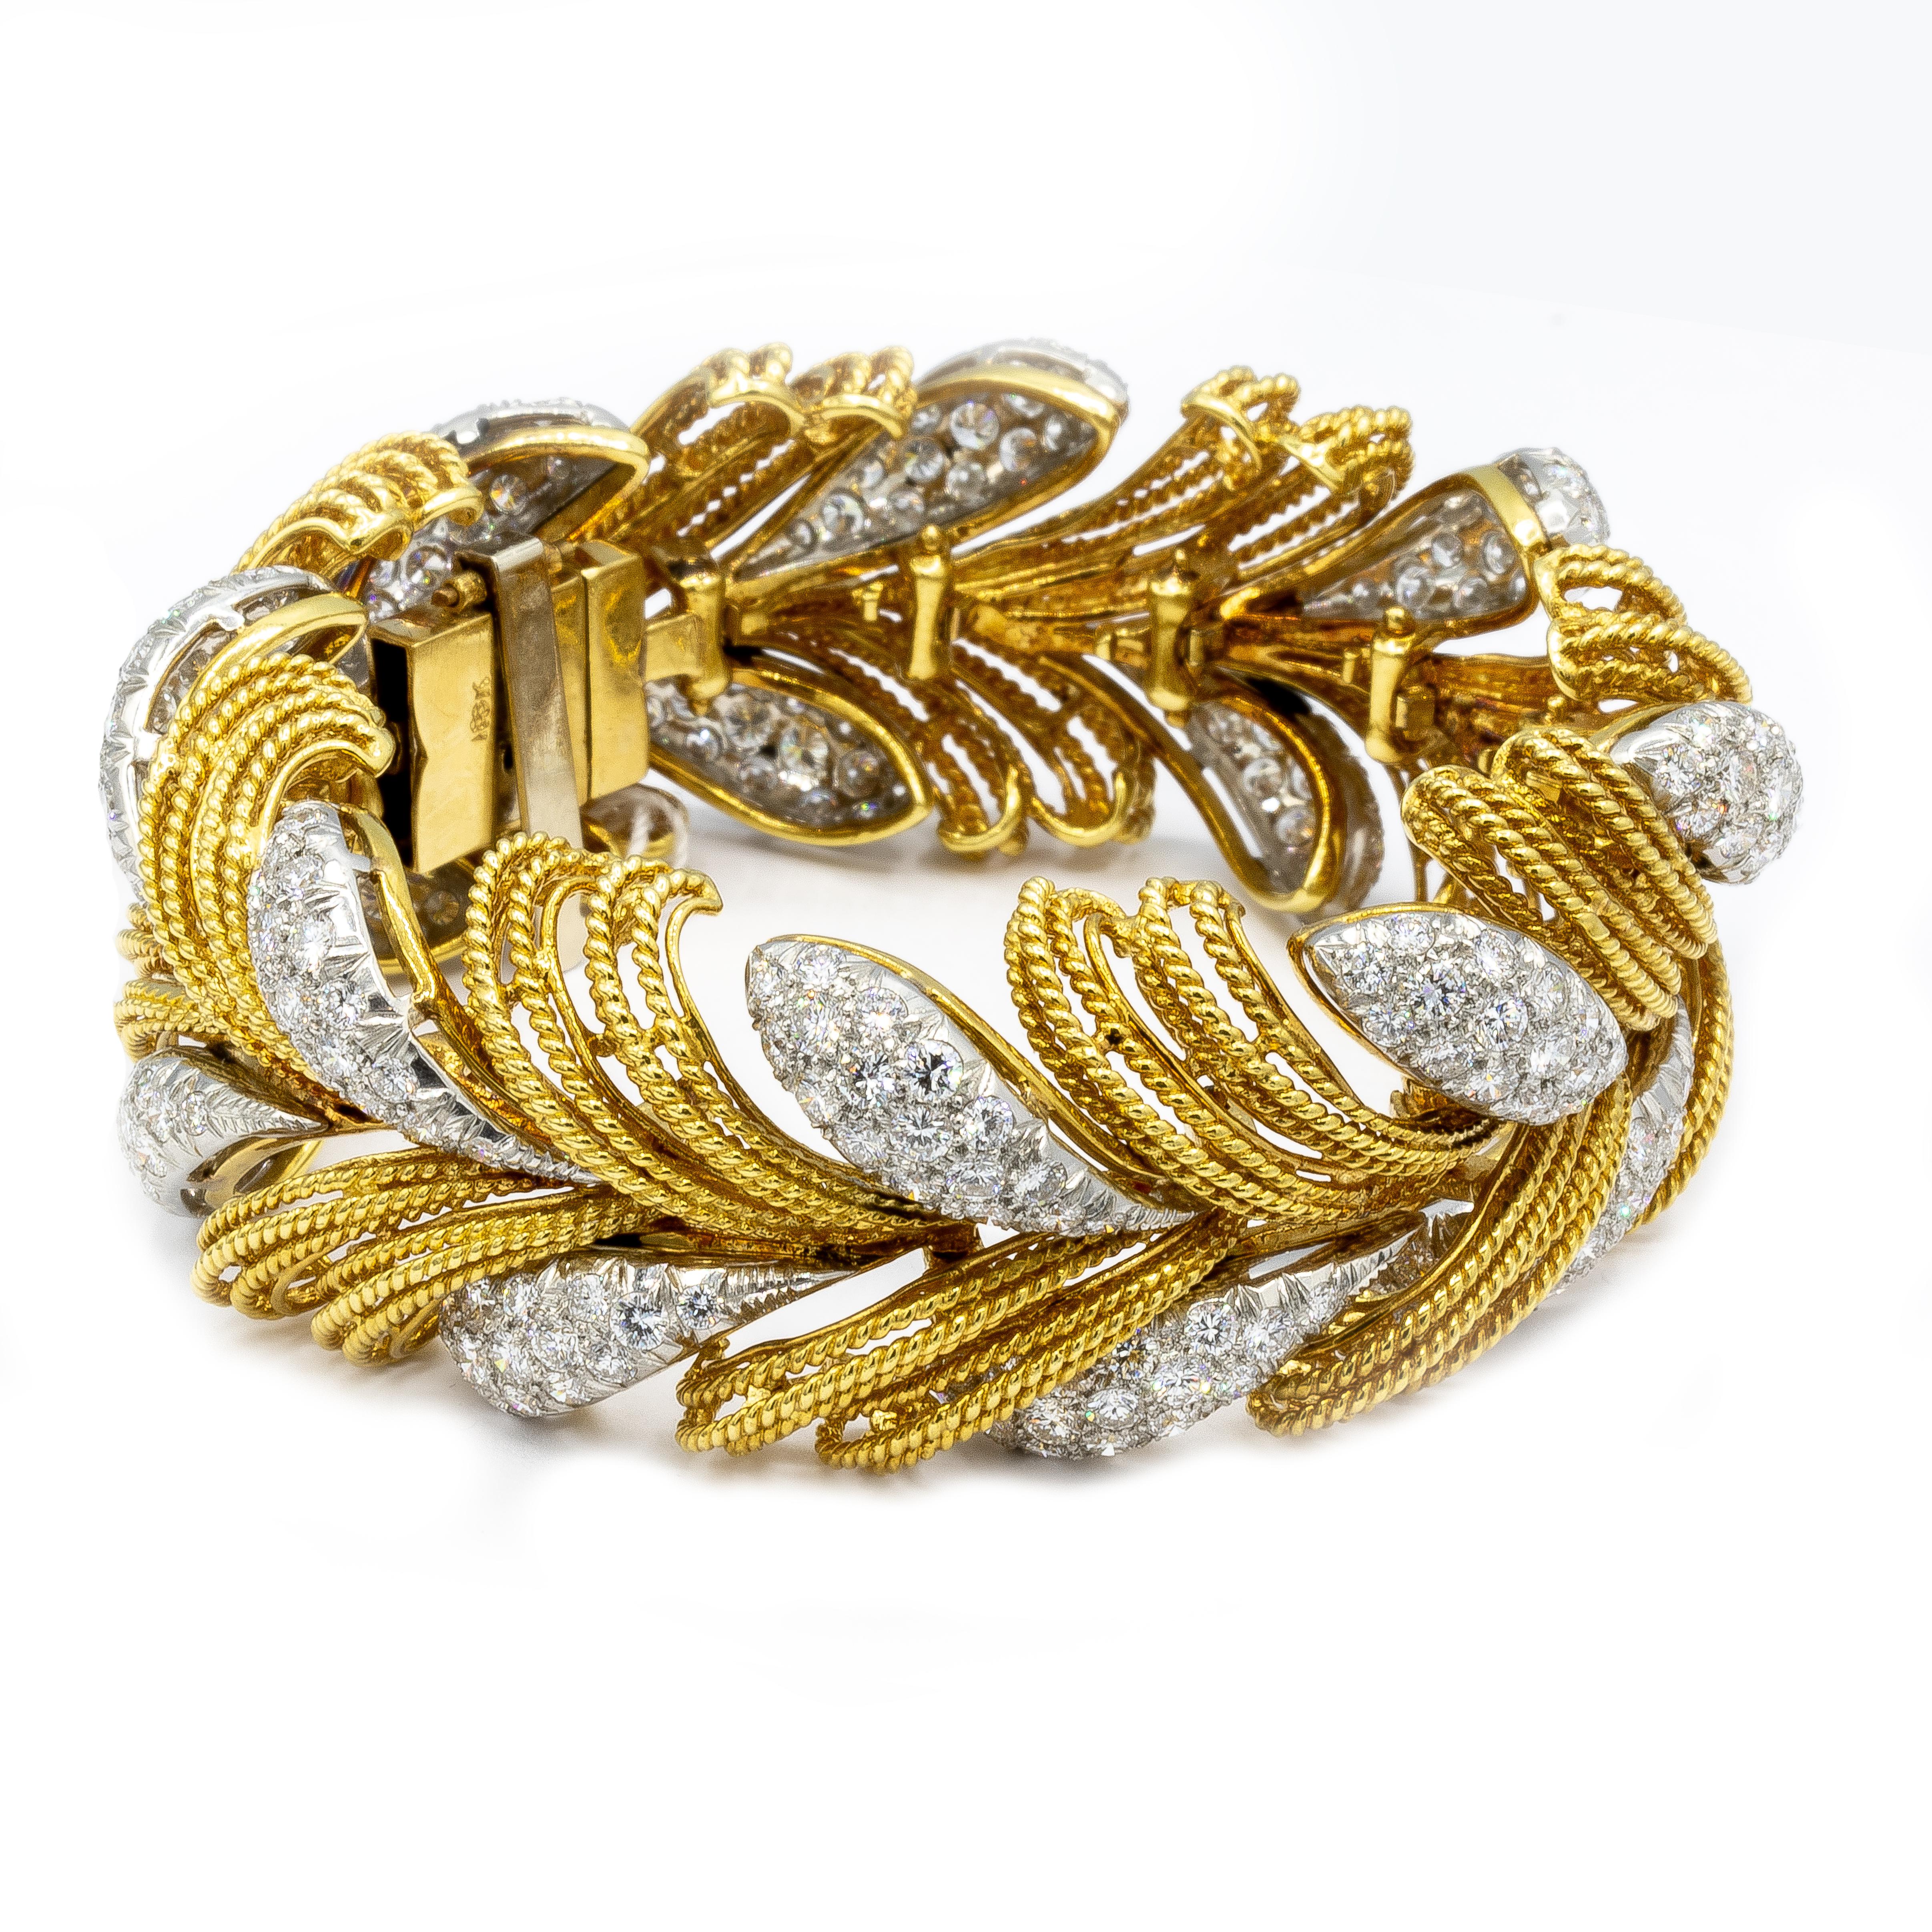 This beautiful piece depicts a branch full of leaves in radiant 18K yellow and white gold, and 8 carats of beautiful F color diamonds. This bracelet will always be a great addition that you're looking for. 
Diamonds = 8 carats
( Color: F, Clarity: